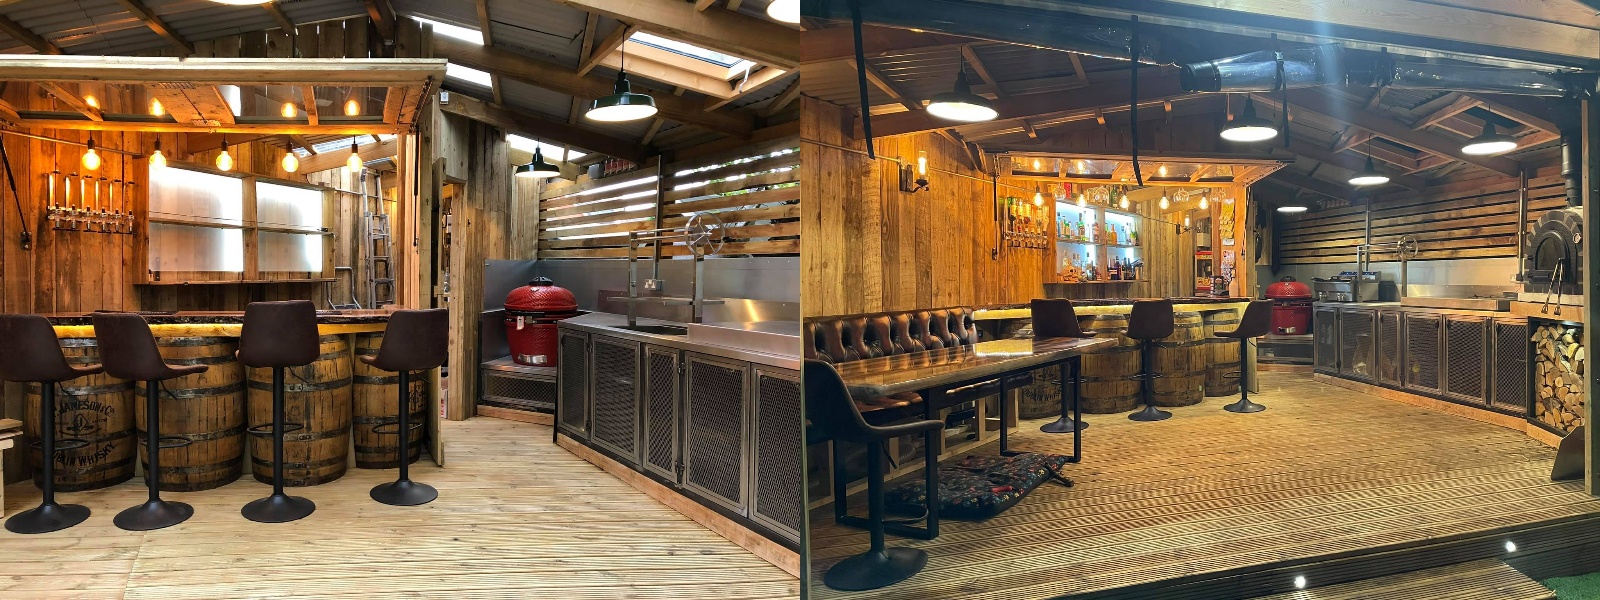 Brit Builds A DIY Steak House From Scratch & Everyone Wants To Know The Details 14